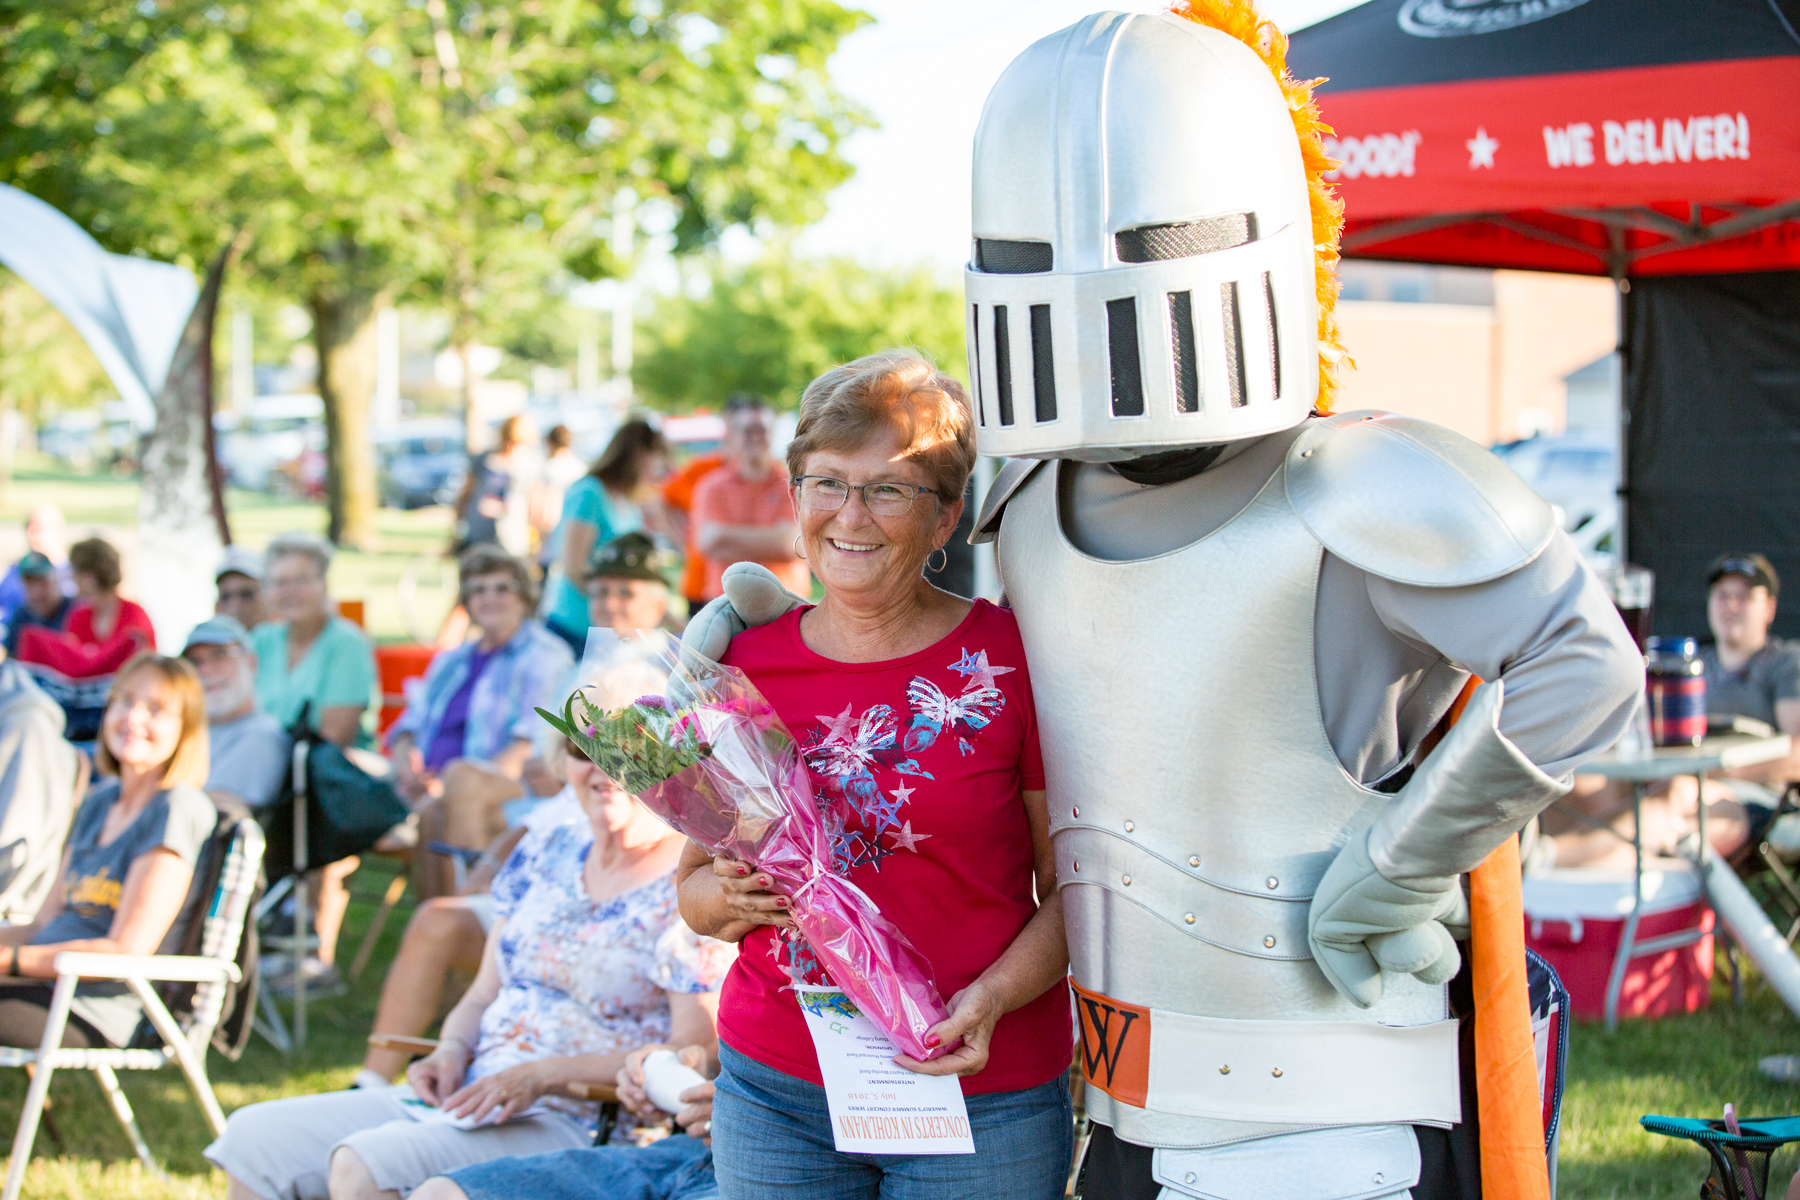 Sir Victor delivers flowers at Concerts in Kohlmann Park in July 2018